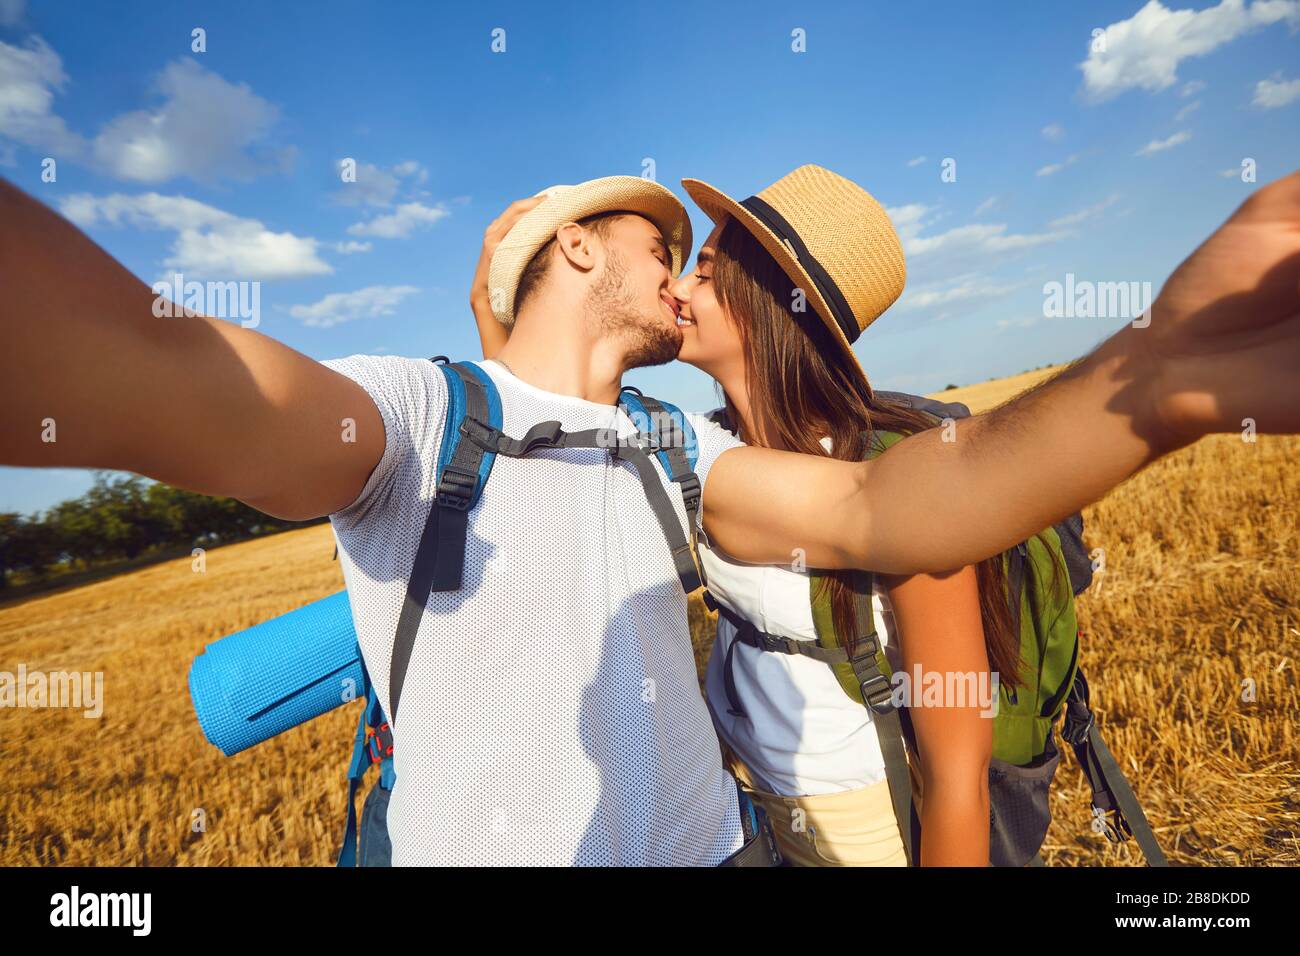 Couple of travelers with backpacks makes selfie photo on the phone on the nature. Stock Photo